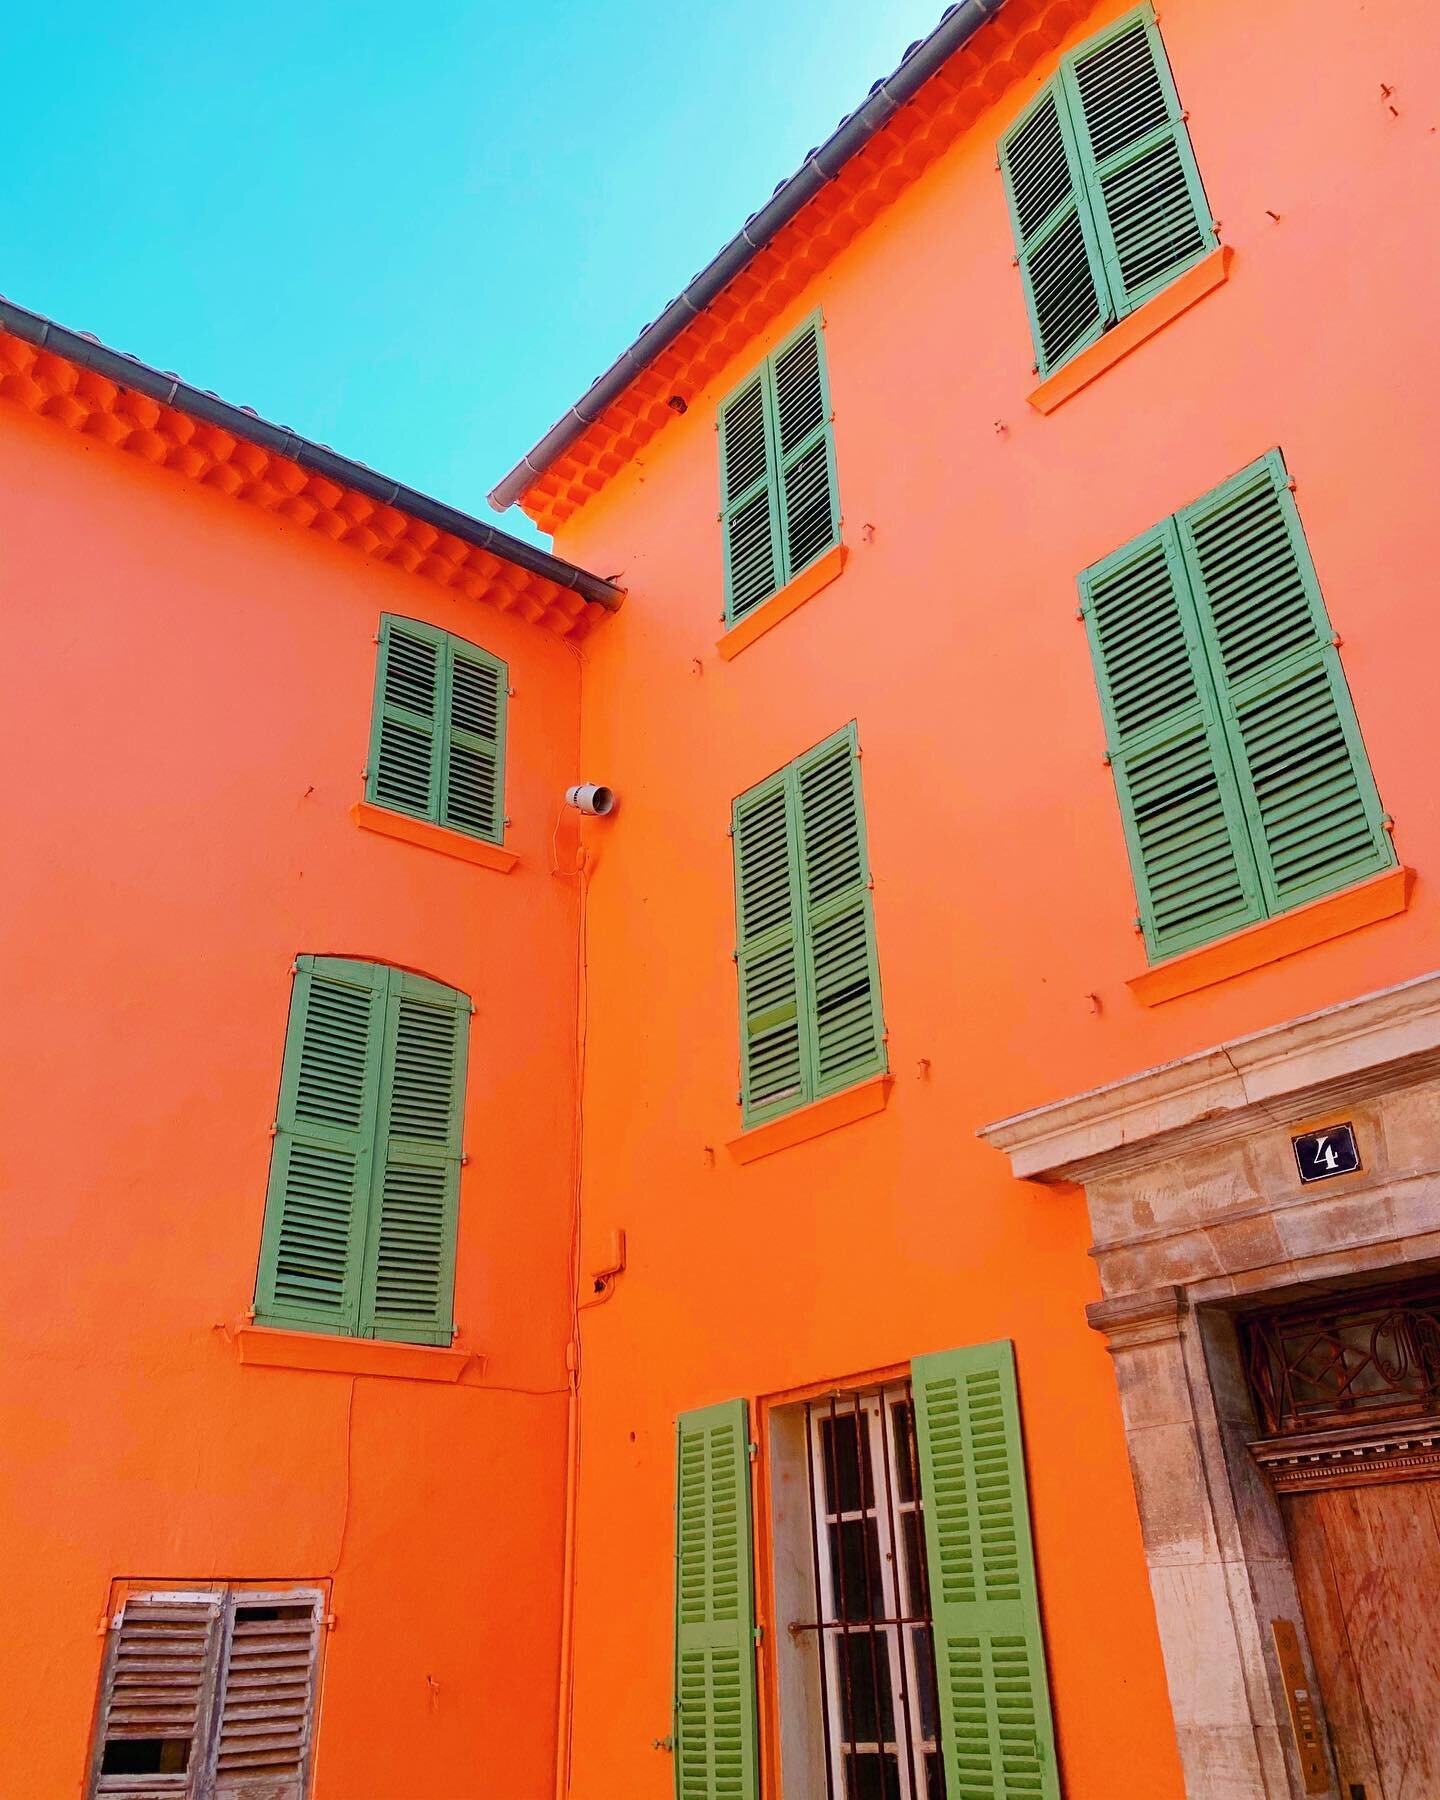 I&rsquo;m always keeping an eye out for unique color palettes when I&rsquo;m out and about. These are colors I wouldn&rsquo;t think to put together. Loving how the colors of the building, shutters, wooden door and sky all work together 🧡💚🤎 💙  The